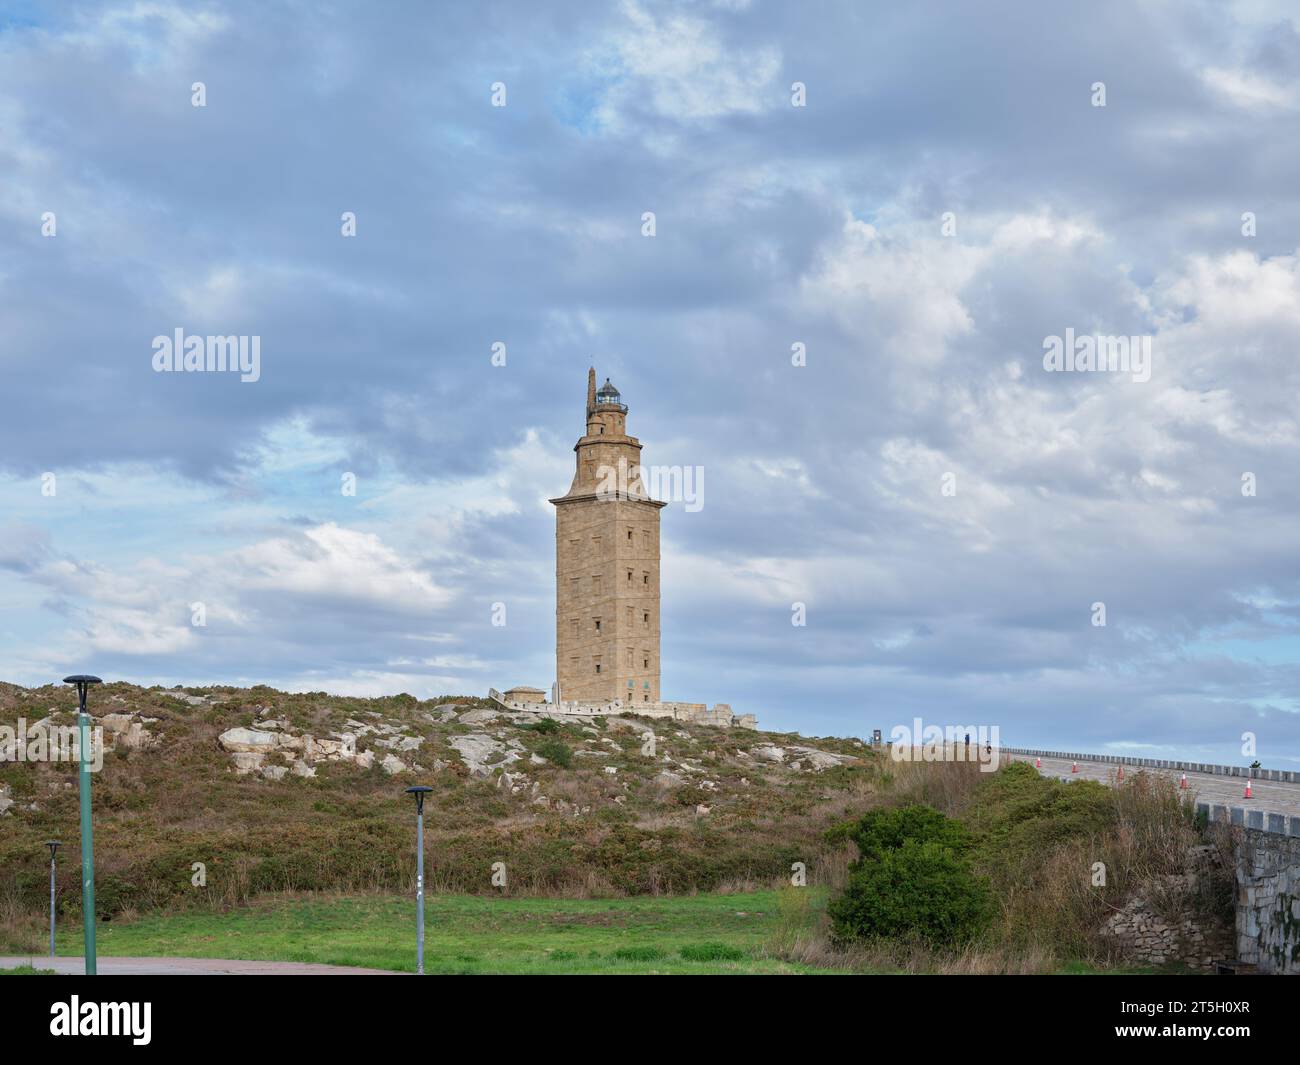 The Tower of Hercules is a tower and lighthouse located on a hill on the peninsula of the city of La Coruña, in Galicia. Stock Photo